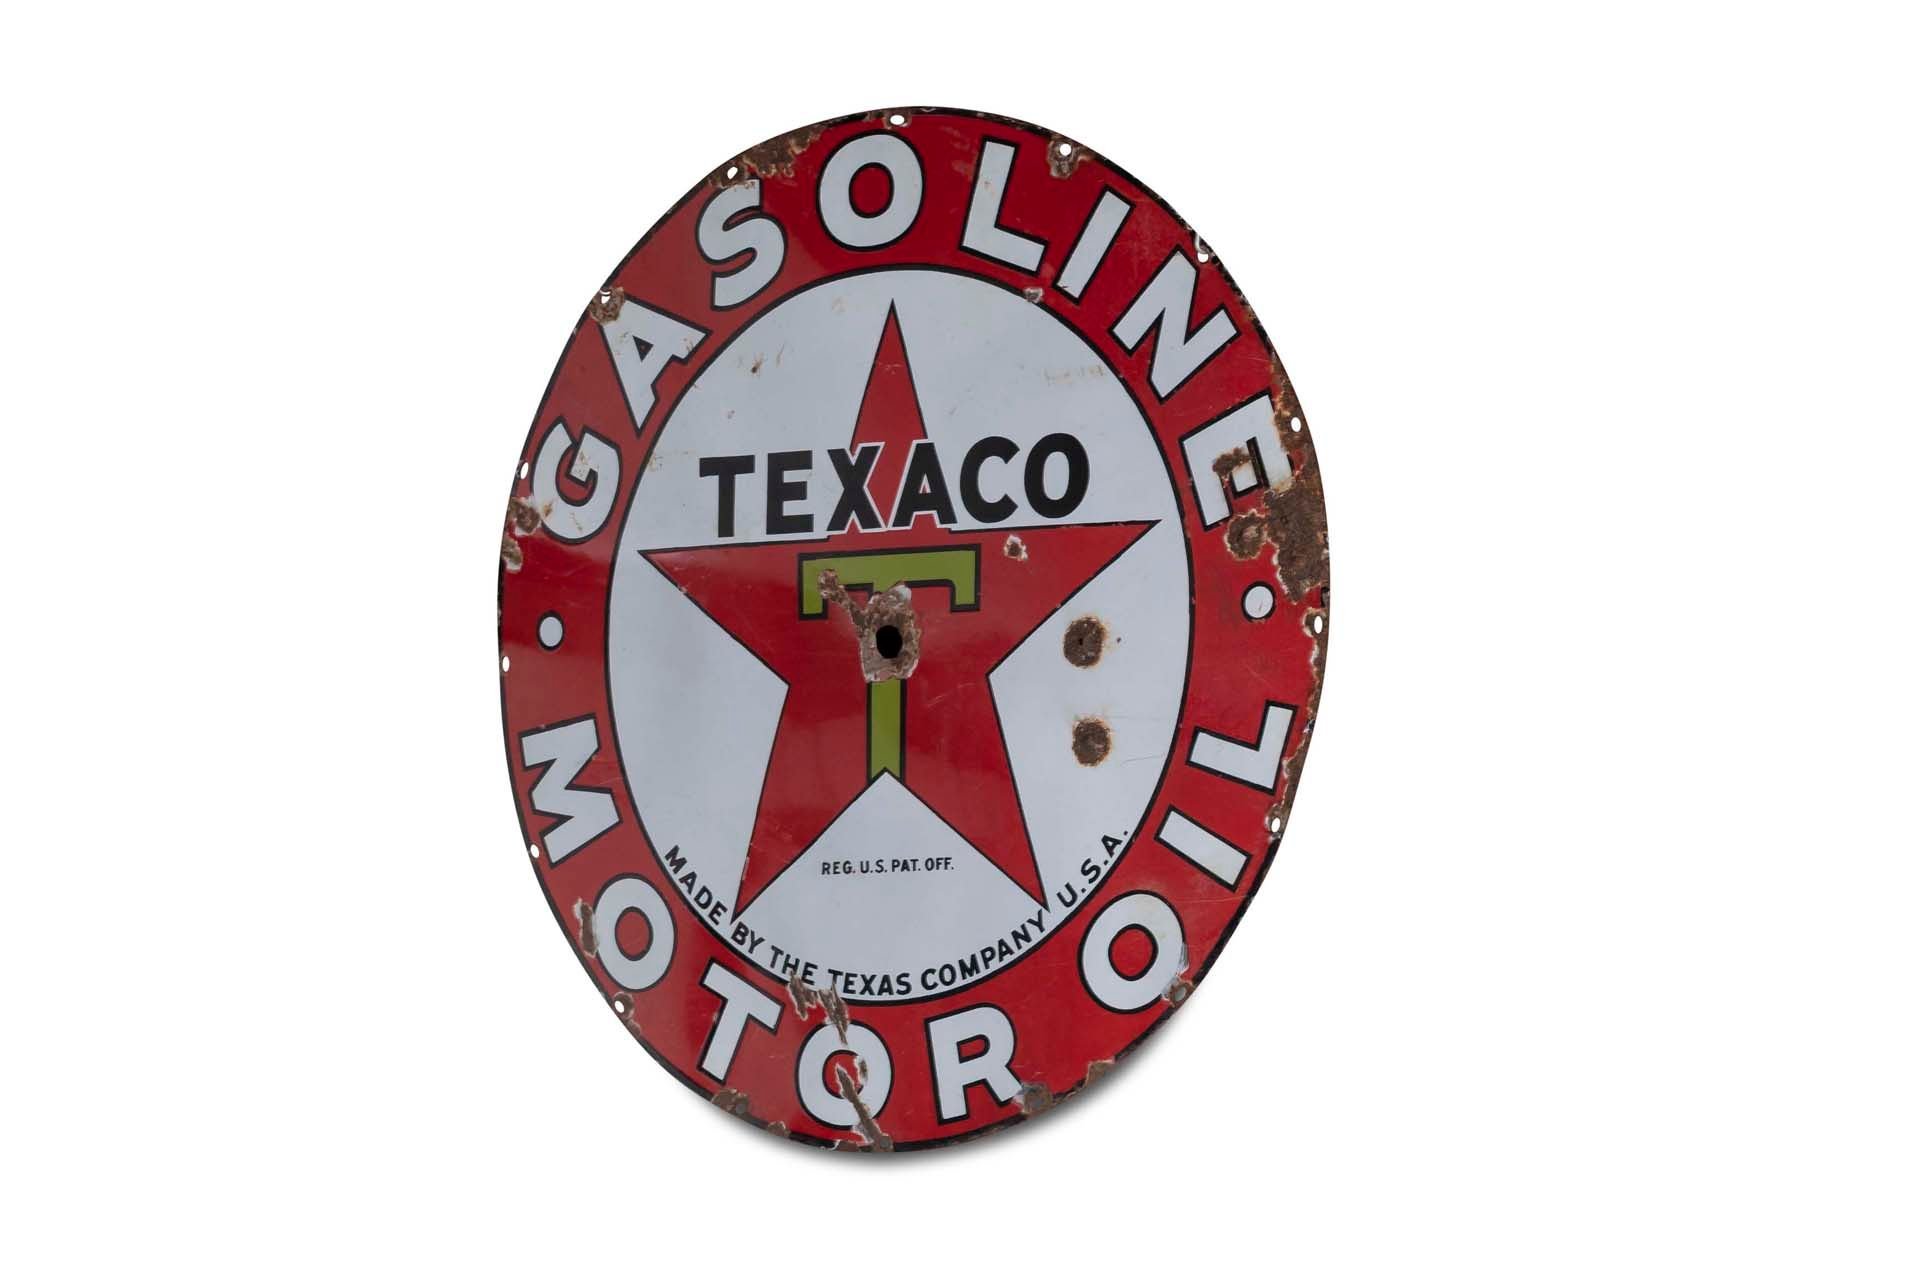 For Sale Texaco Round Porcelain sign